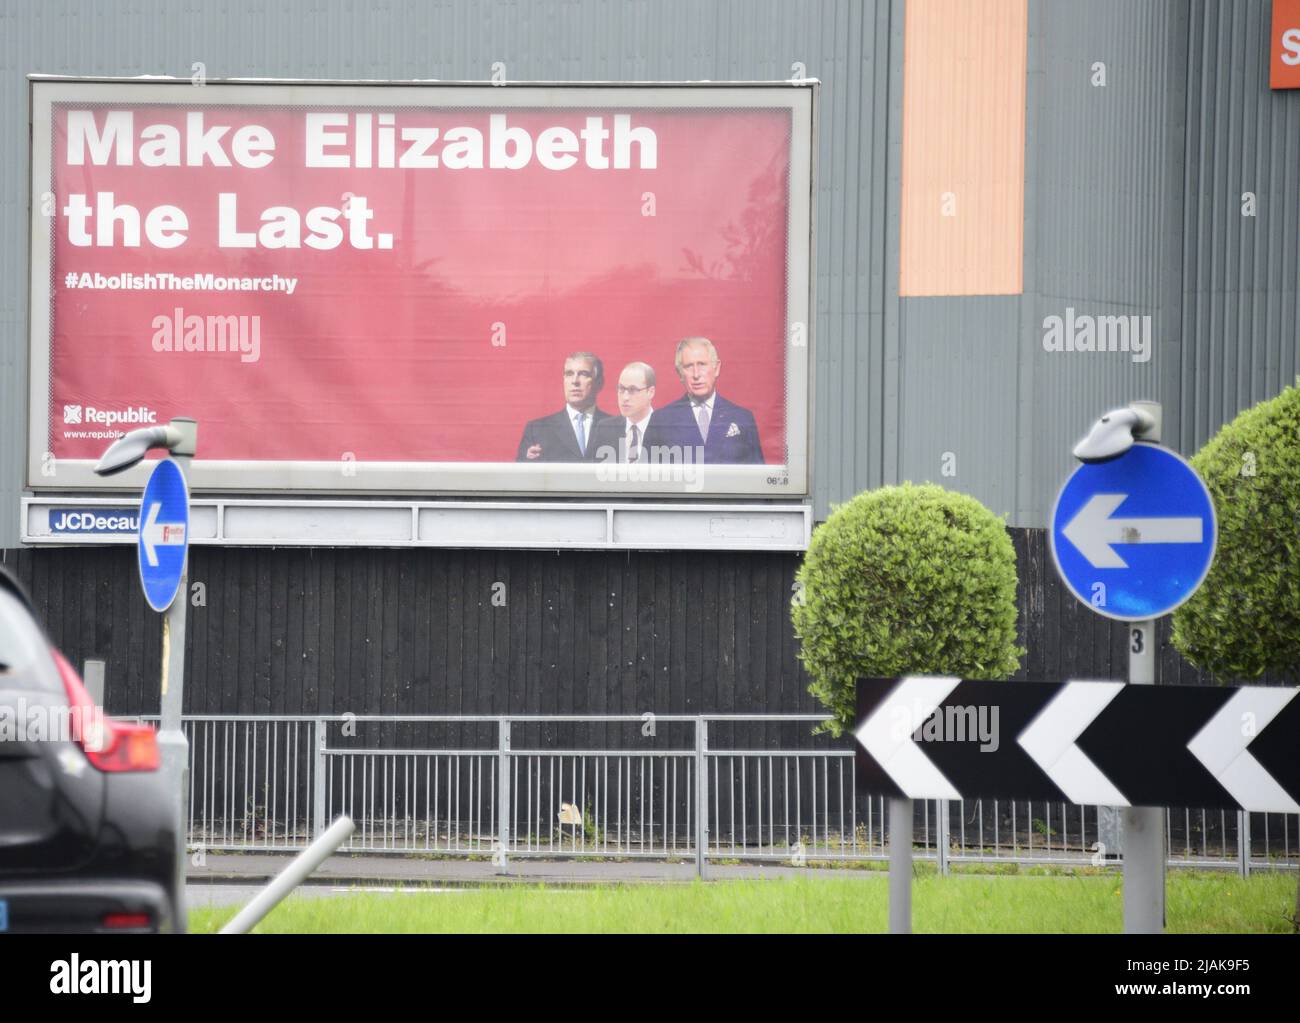 Manchester, UK, 31st May, 2022. 'Make Elizabeth the Last. Abolish the Monarchy' advertising billboard appears in Manchester, England, UK, in the run up to the Platinum Jubilee. Media report billboard organisers Republic saying: 'Recent polls now show more than one in four want the monarchy abolished, while support has dropped from 75% to 60%. Ten years ago, around 10,000 street parties were registered for the jubilee. This time, it's just 1,700.' The same poster has appeared in other UK cities, produced after crowfunding money to carry out the campaign. Credit: Terry Waller/Alamy Live News Stock Photo